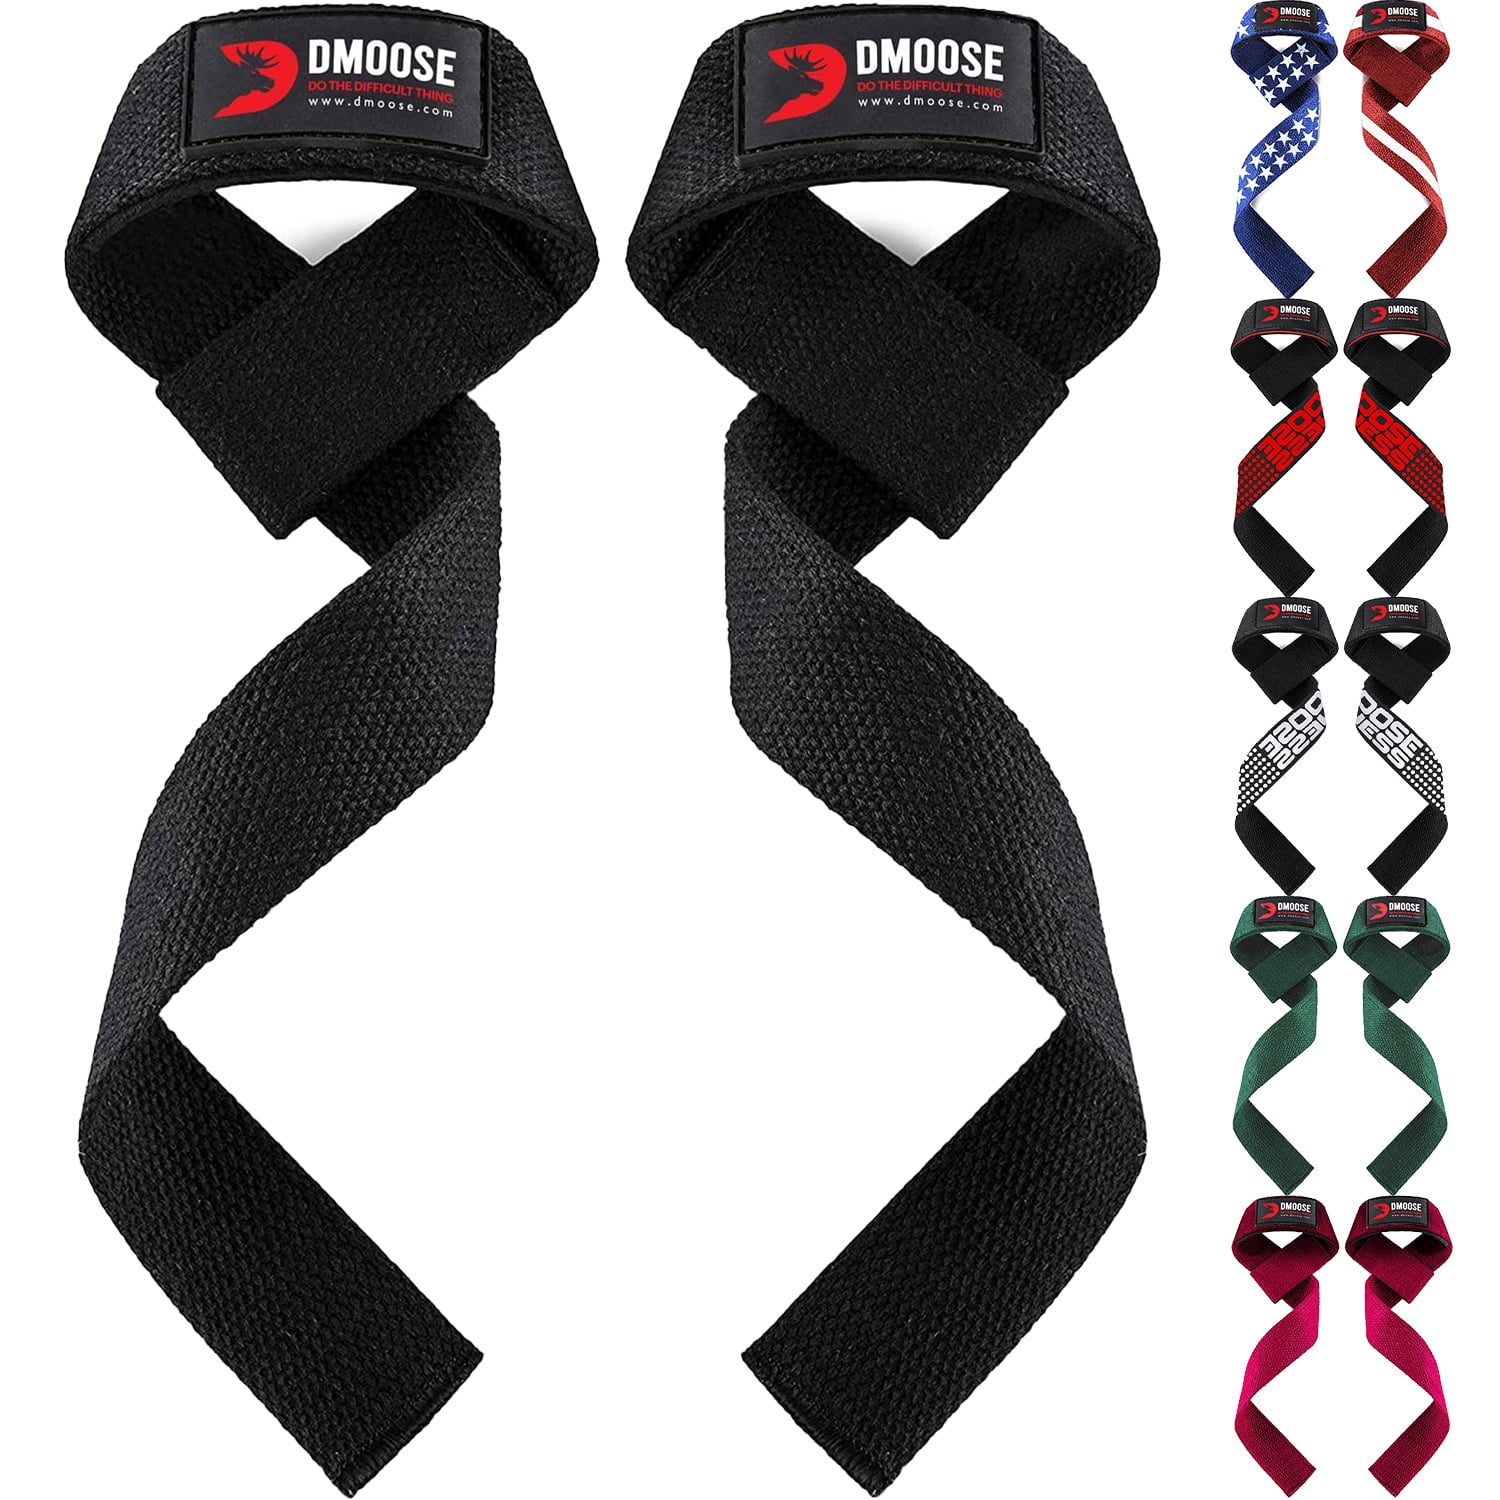 DMoose Fitness Lifting Wrist Straps (Pair) for Weightlifting, Crossfit,  Bodybuilding, Powerlifting with Soft Neoprene Padded Support for Max Grip  Strength Training, Deadlifts 